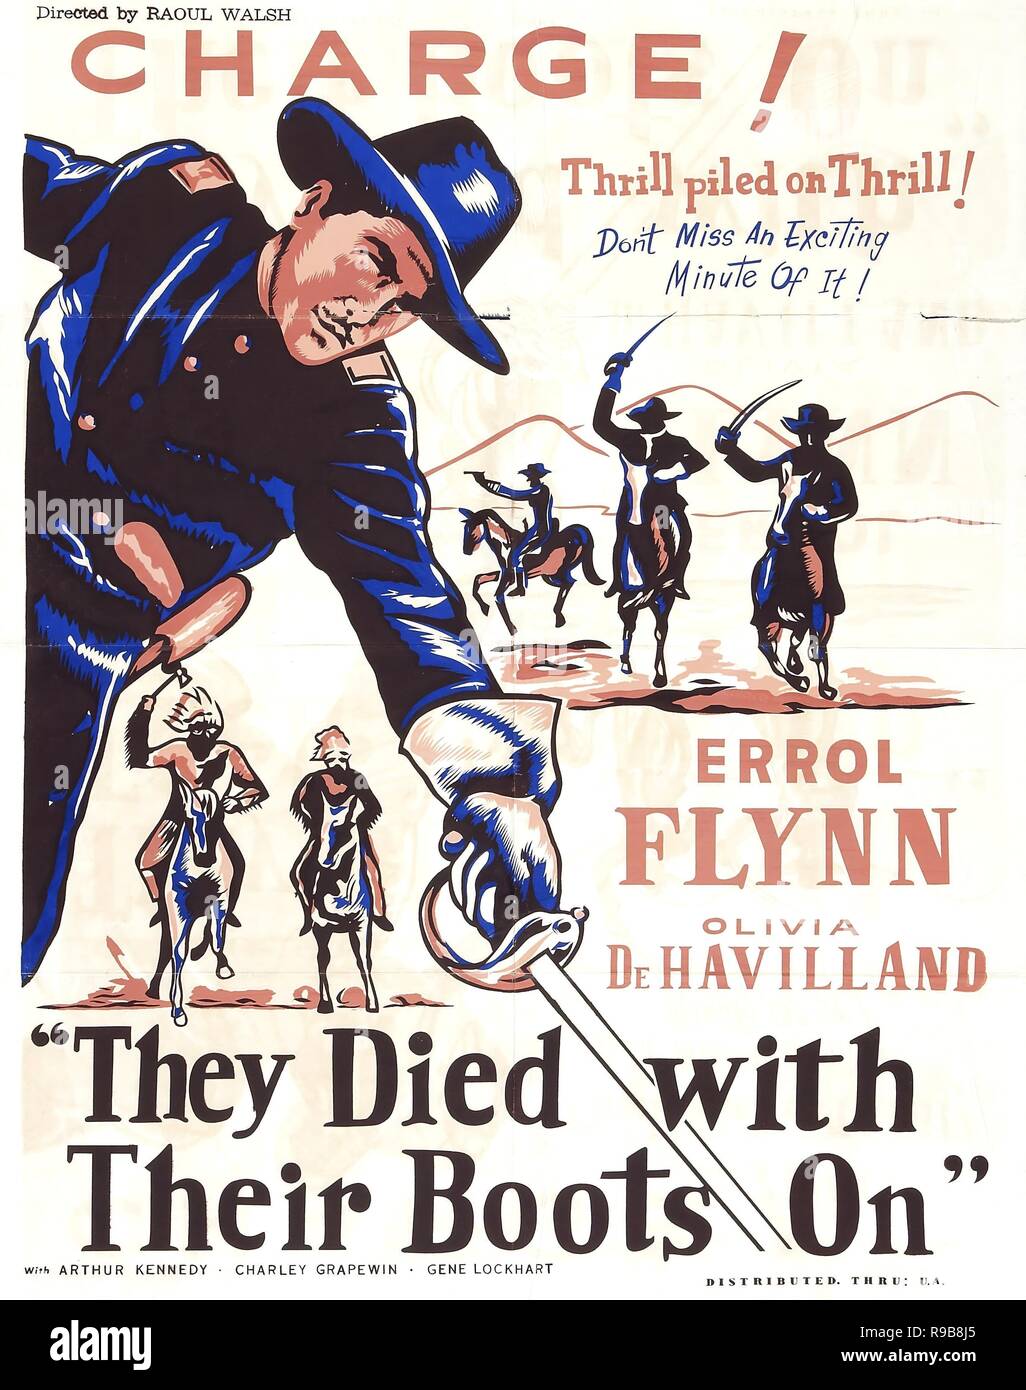 Original film title: THEY DIED WITH THEIR BOOTS ON. English title: THEY DIED  WITH THEIR BOOTS ON. Year: 1941. Director: RAOUL WALSH. Credit: WARNER  BROTHERS / Album Stock Photo - Alamy